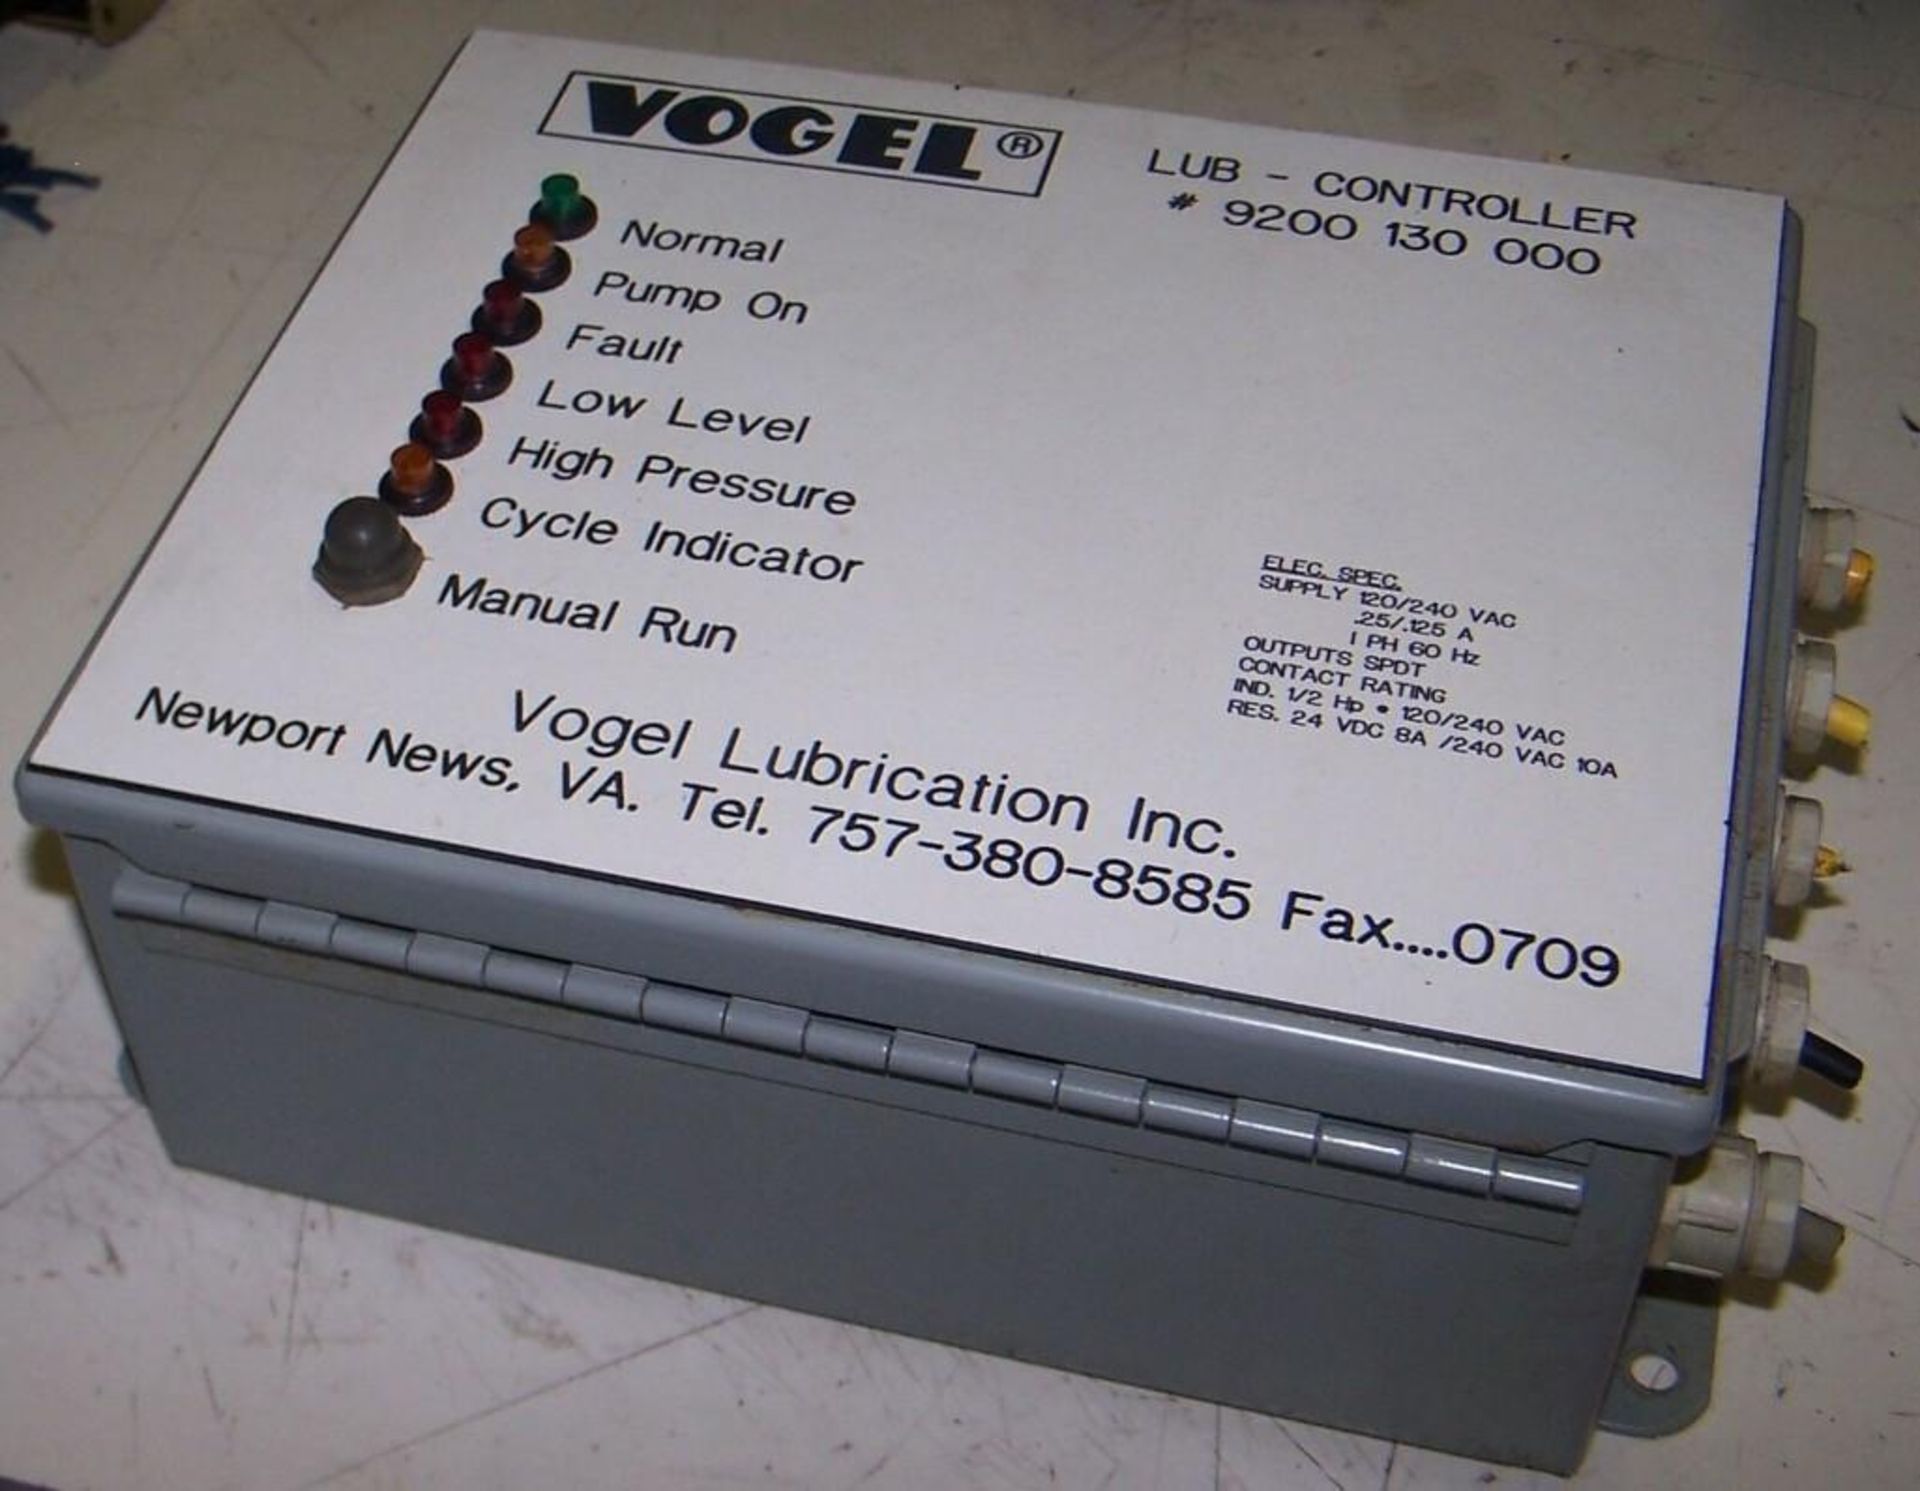 Lot of (2) Vogel # 9200-130-000 Lube - Controllers